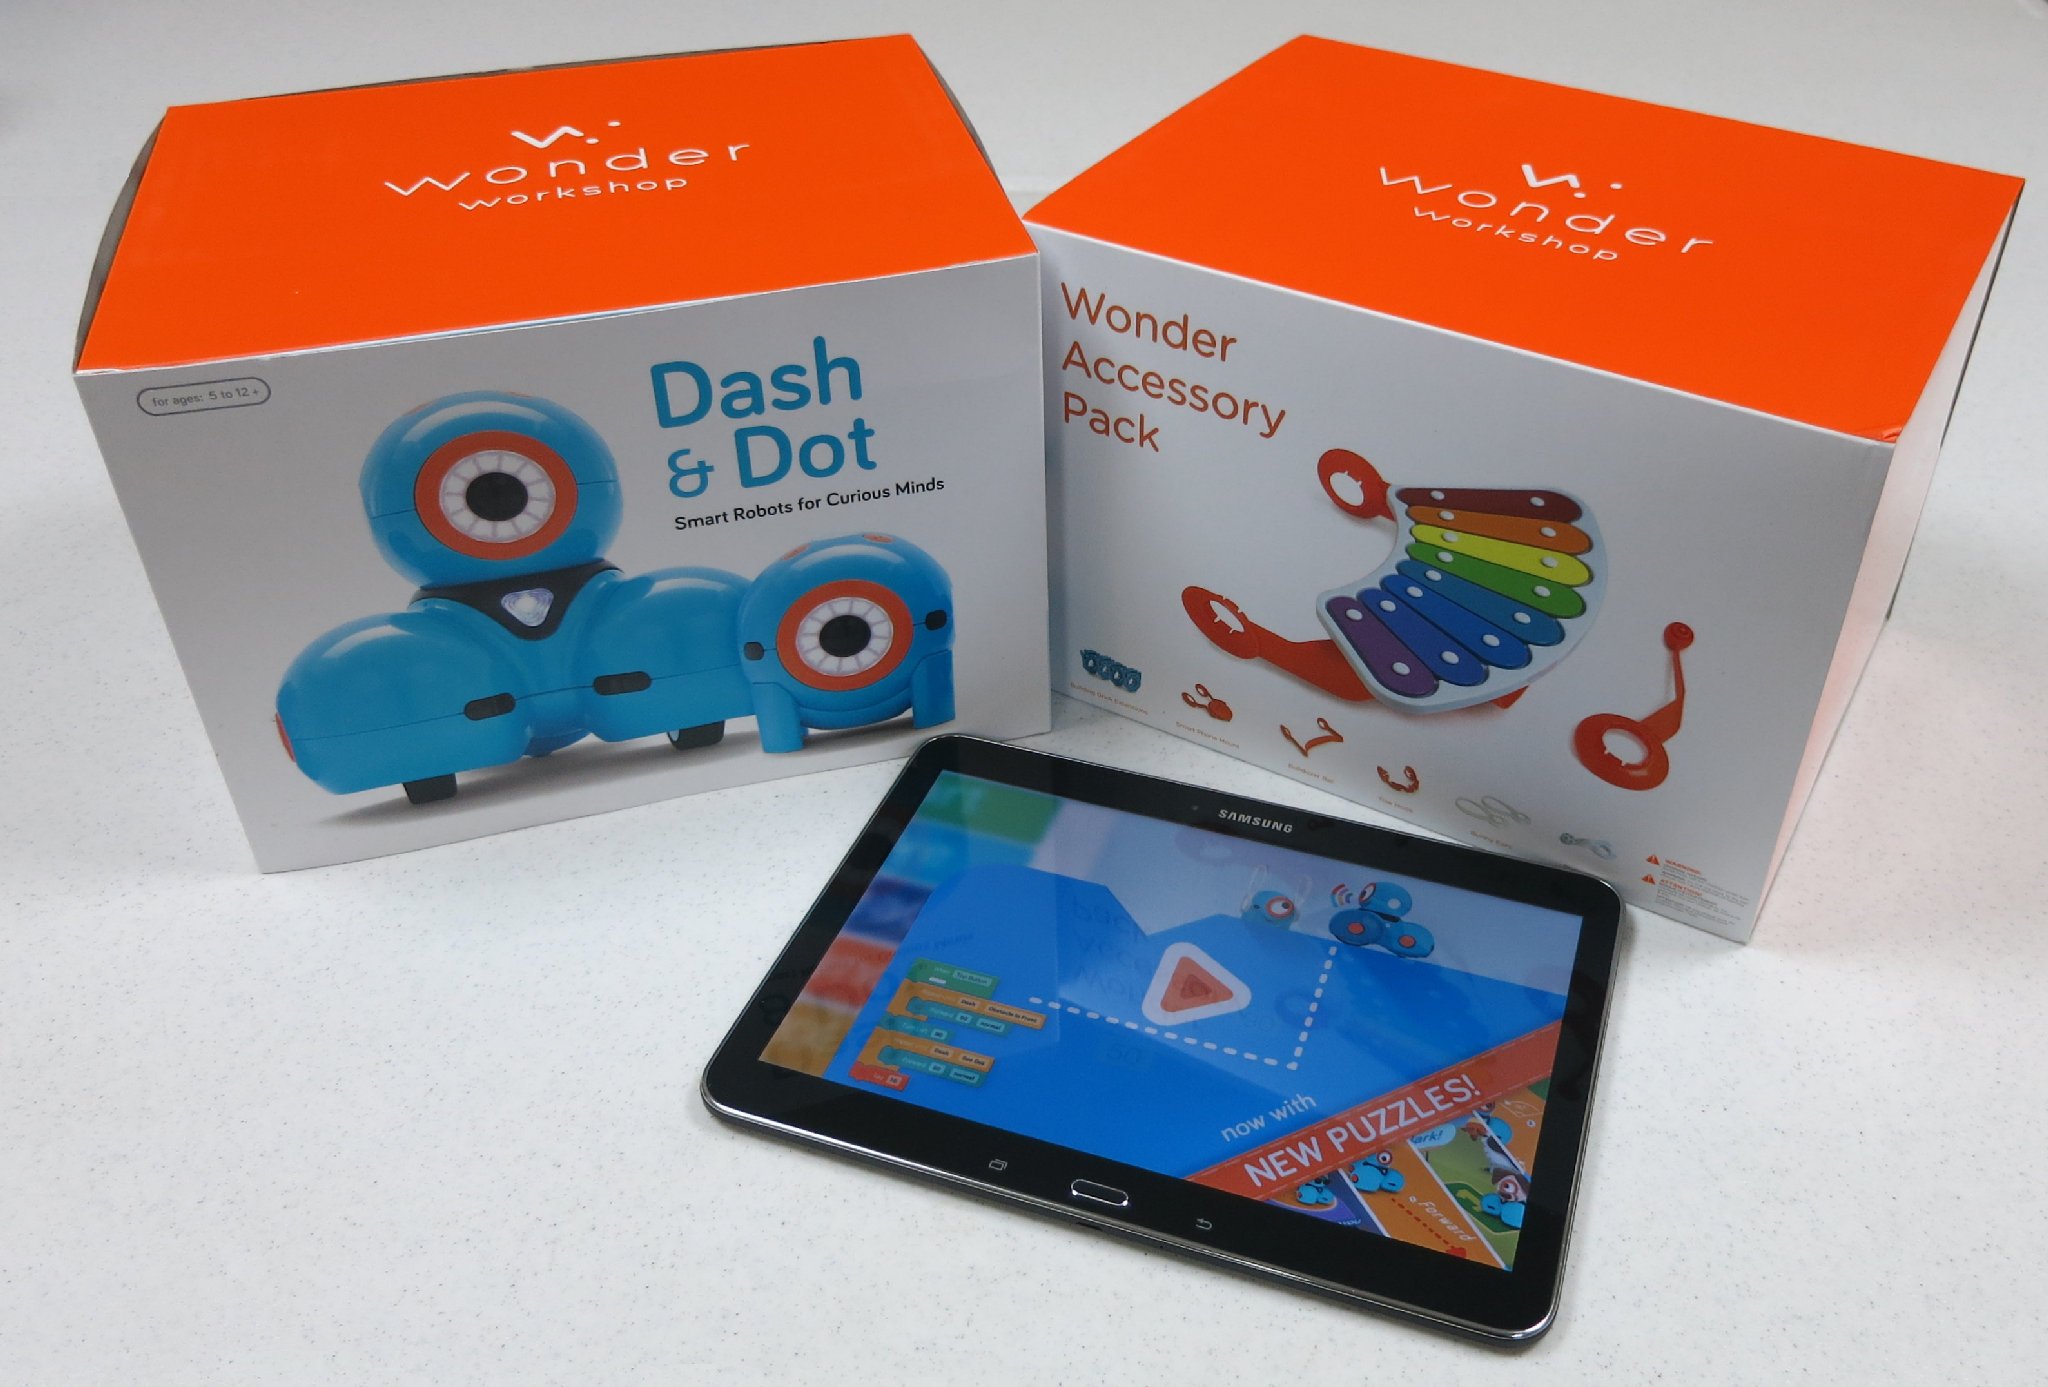 Dash Puzzlets Add-On (Dash Robot and Play Tray Not Included)